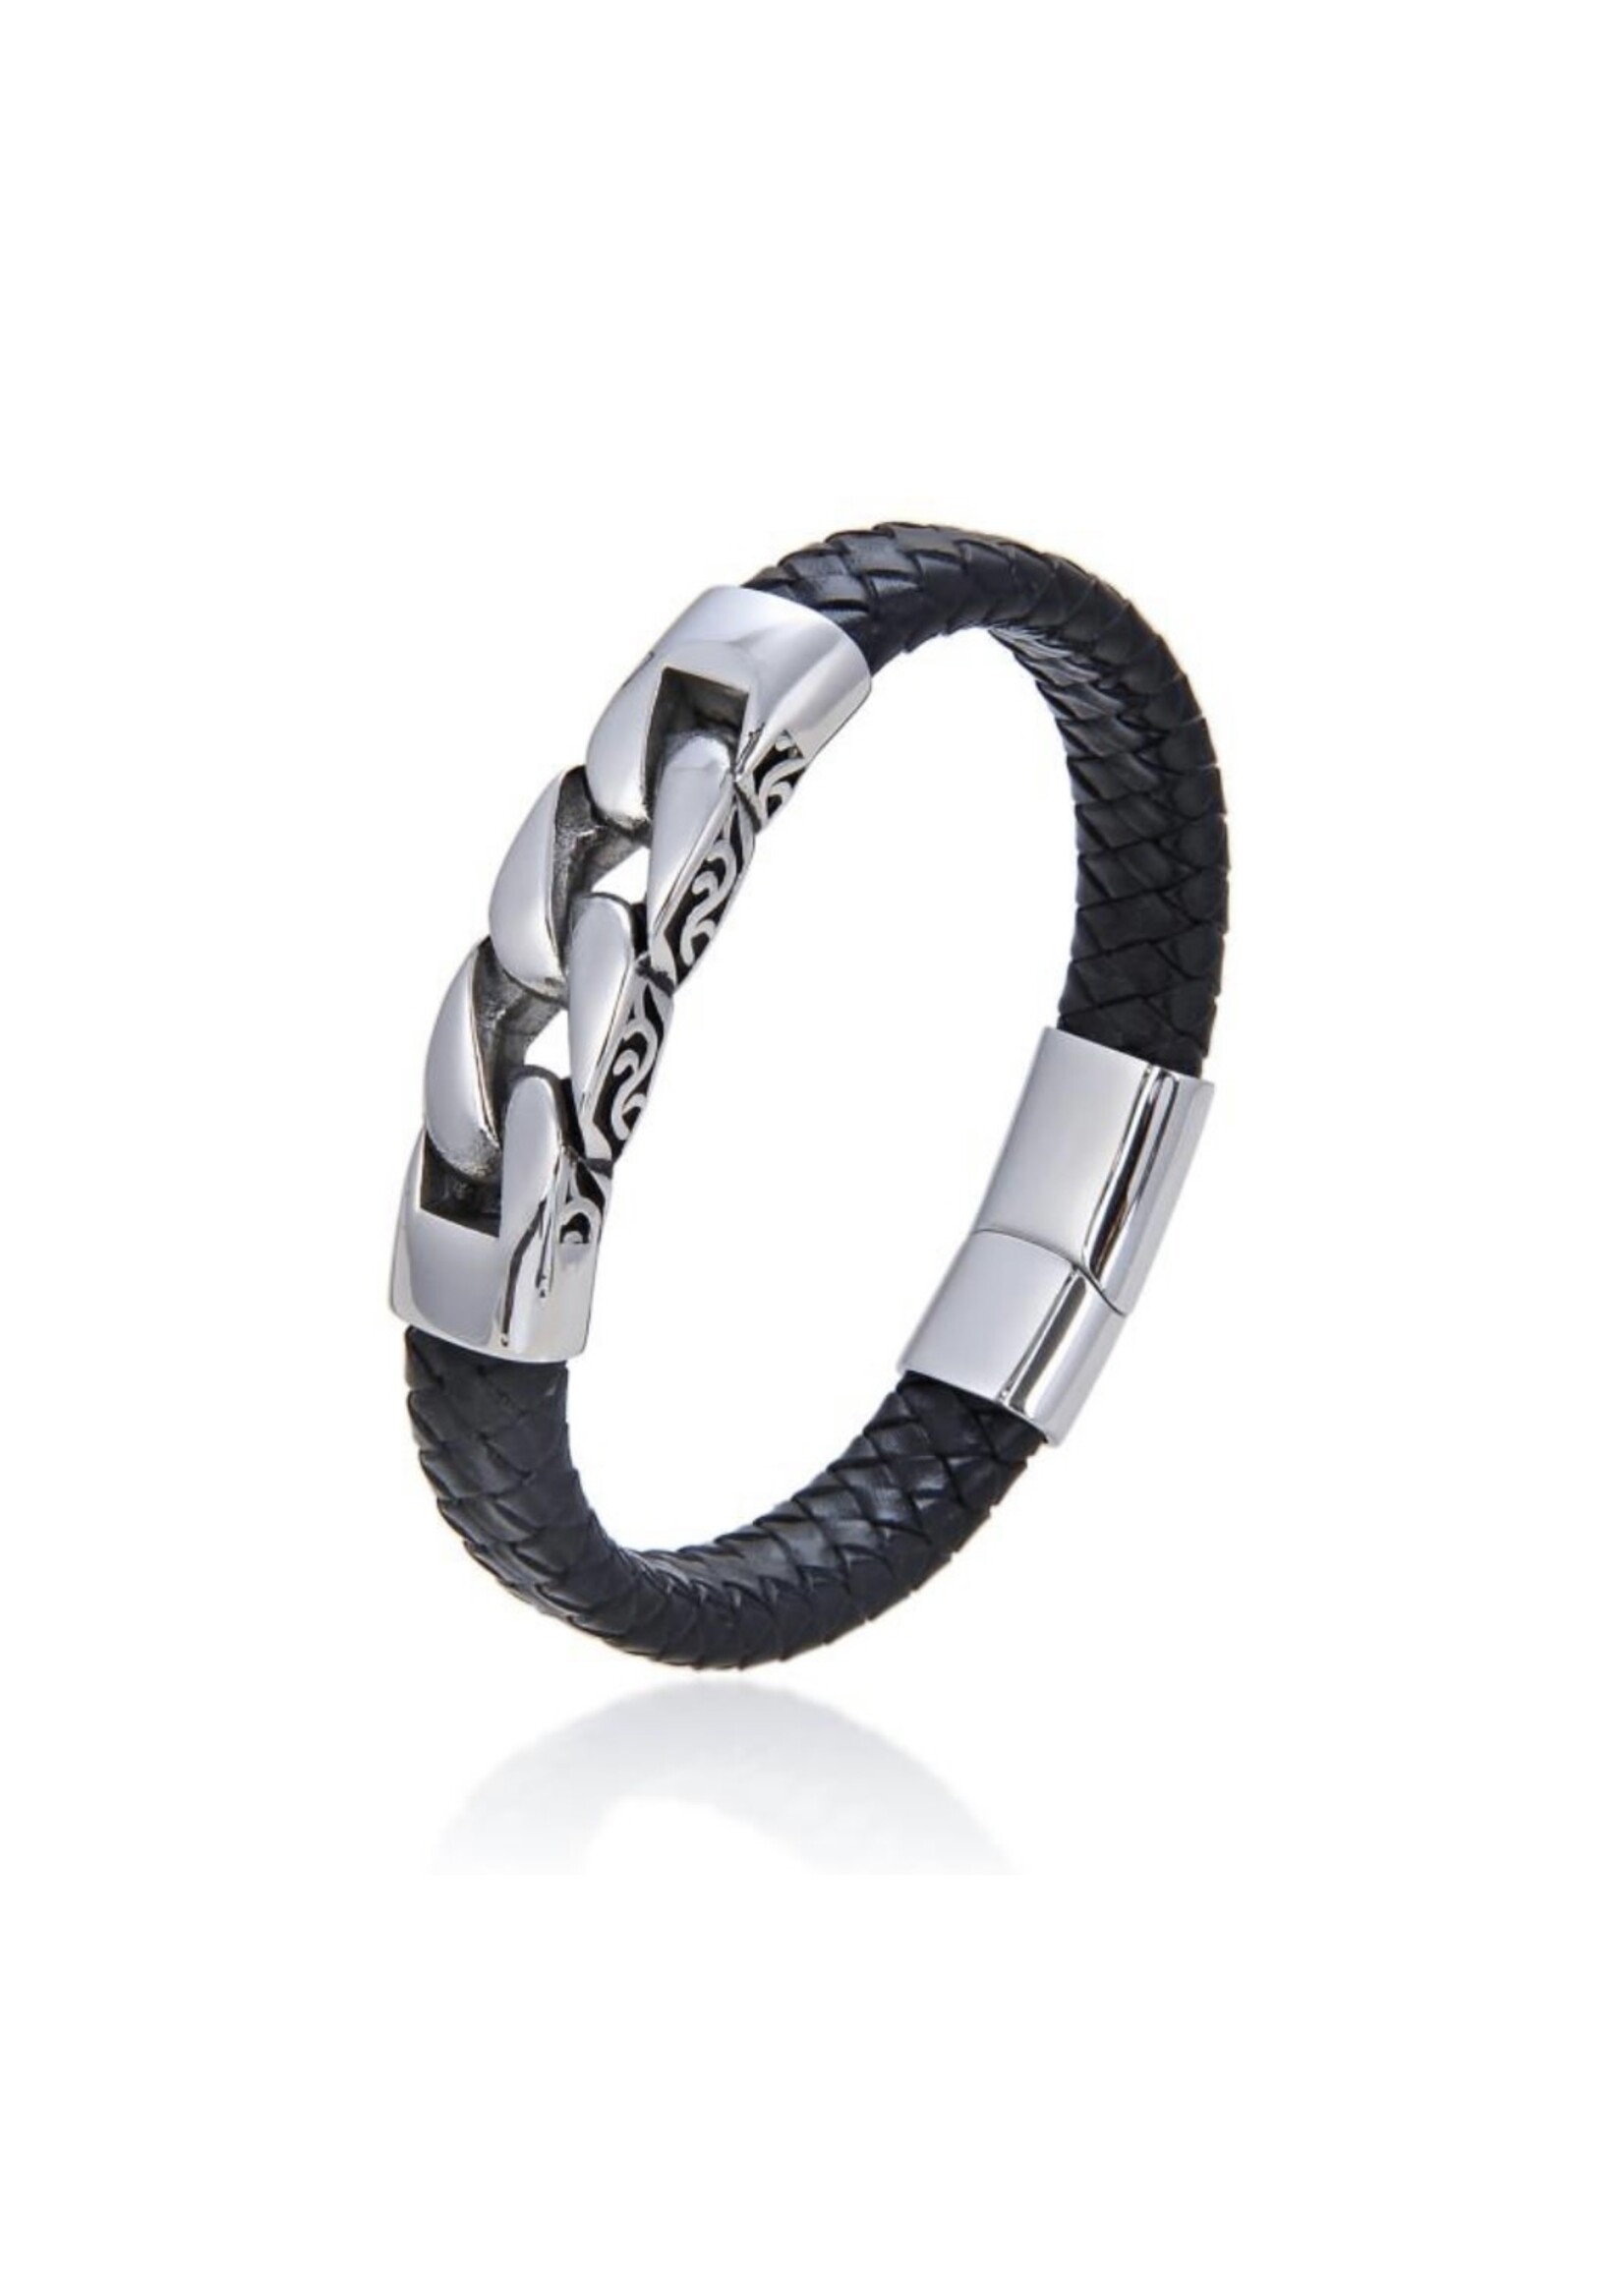 MEN’S LEATHER BRACELET WITH STAINLESS STEEL LOCK, 8.5 INCHES.